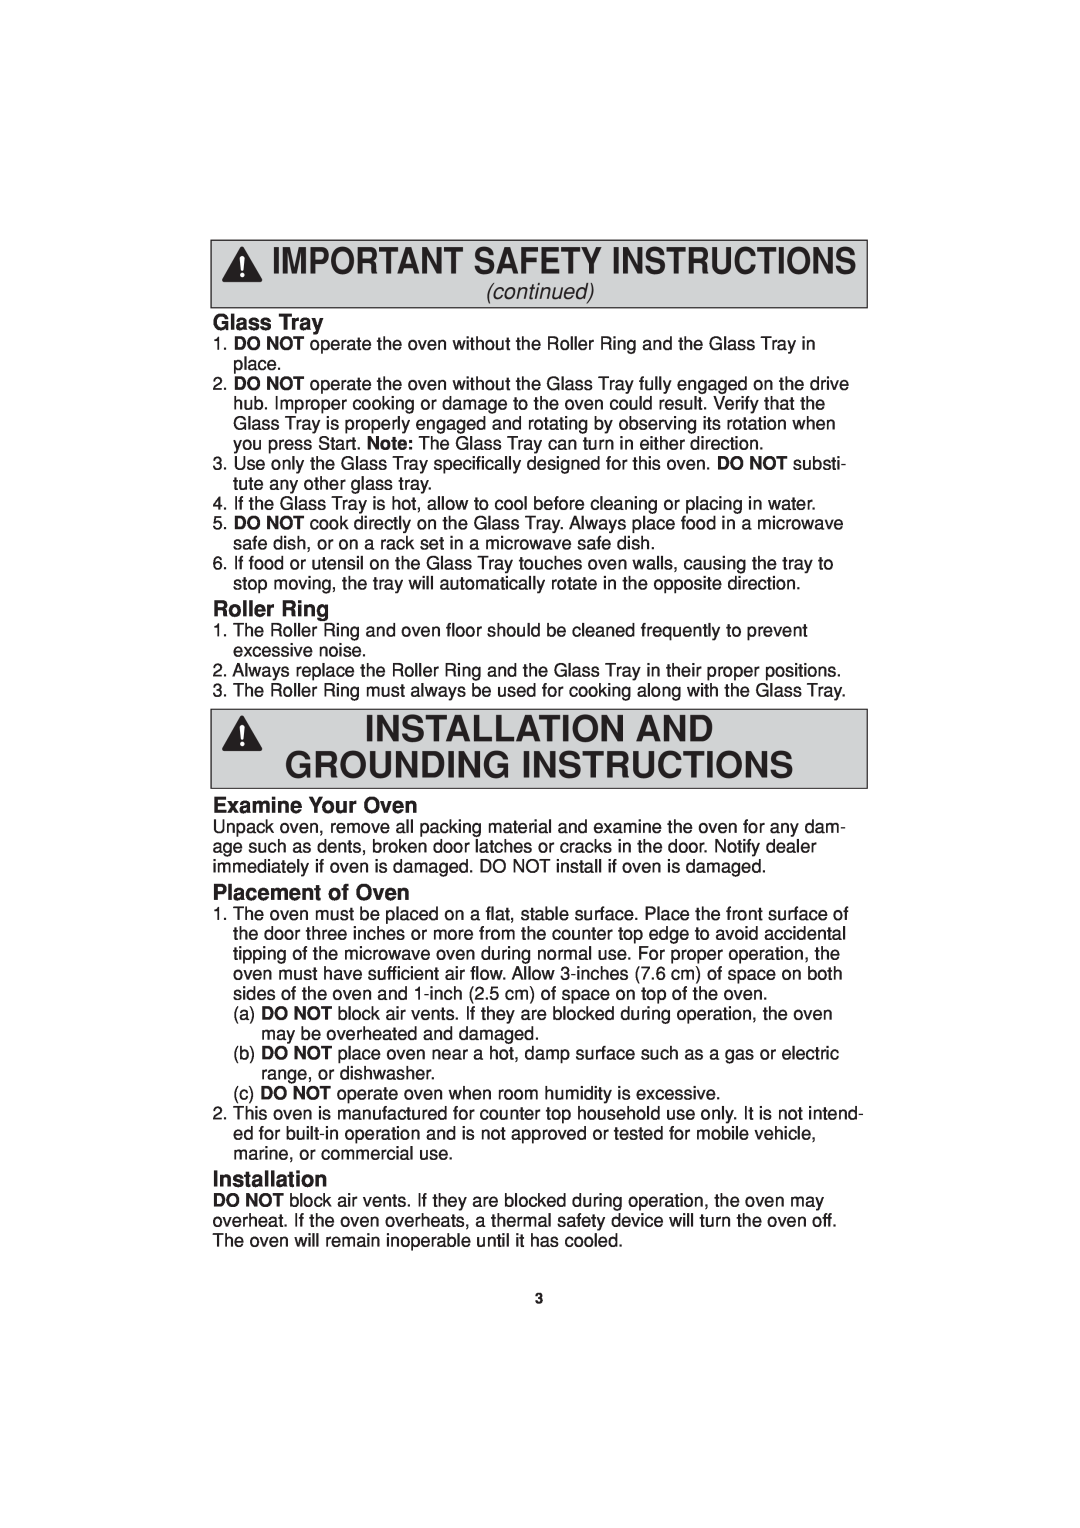 Panasonic NN-H504 Installation And Grounding Instructions, Glass Tray, Roller Ring, Examine Your Oven, Placement of Oven 